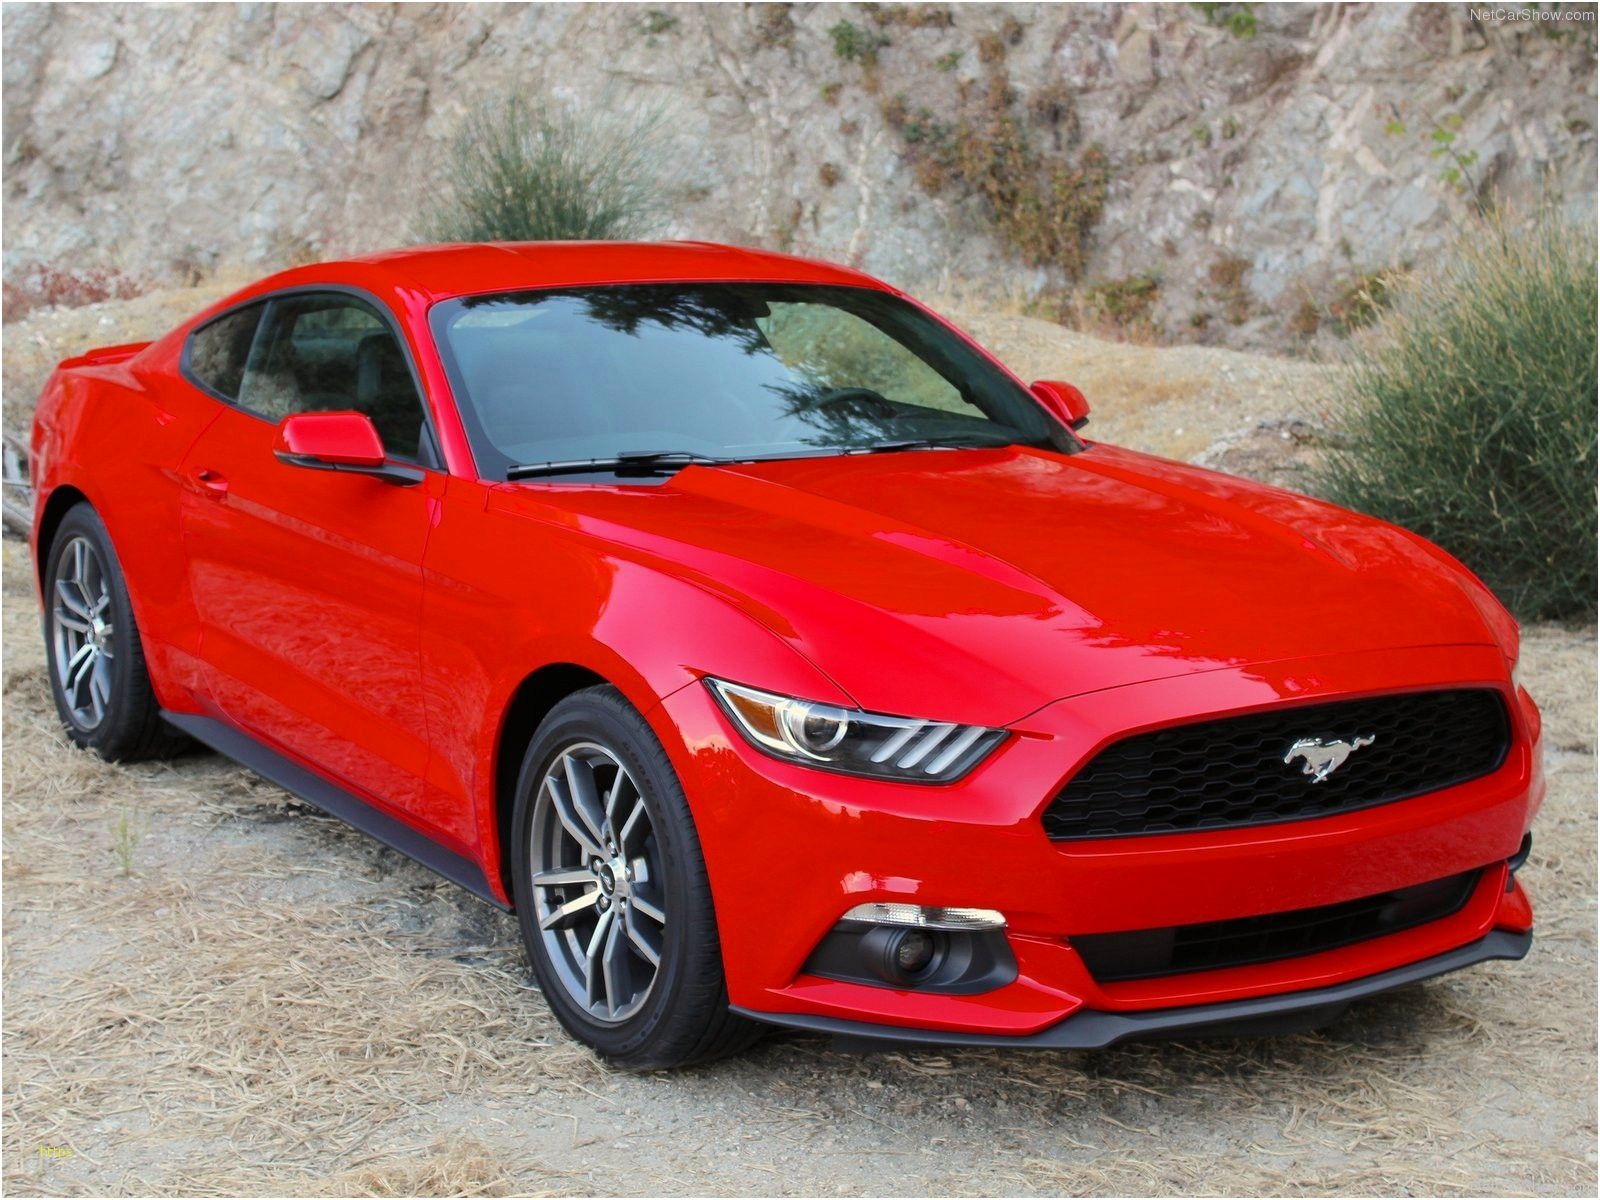 Mustang Iphone Wallpaper Fresh Ford Mustang 2015 News - Mustang Ecoboost 2014 , HD Wallpaper & Backgrounds